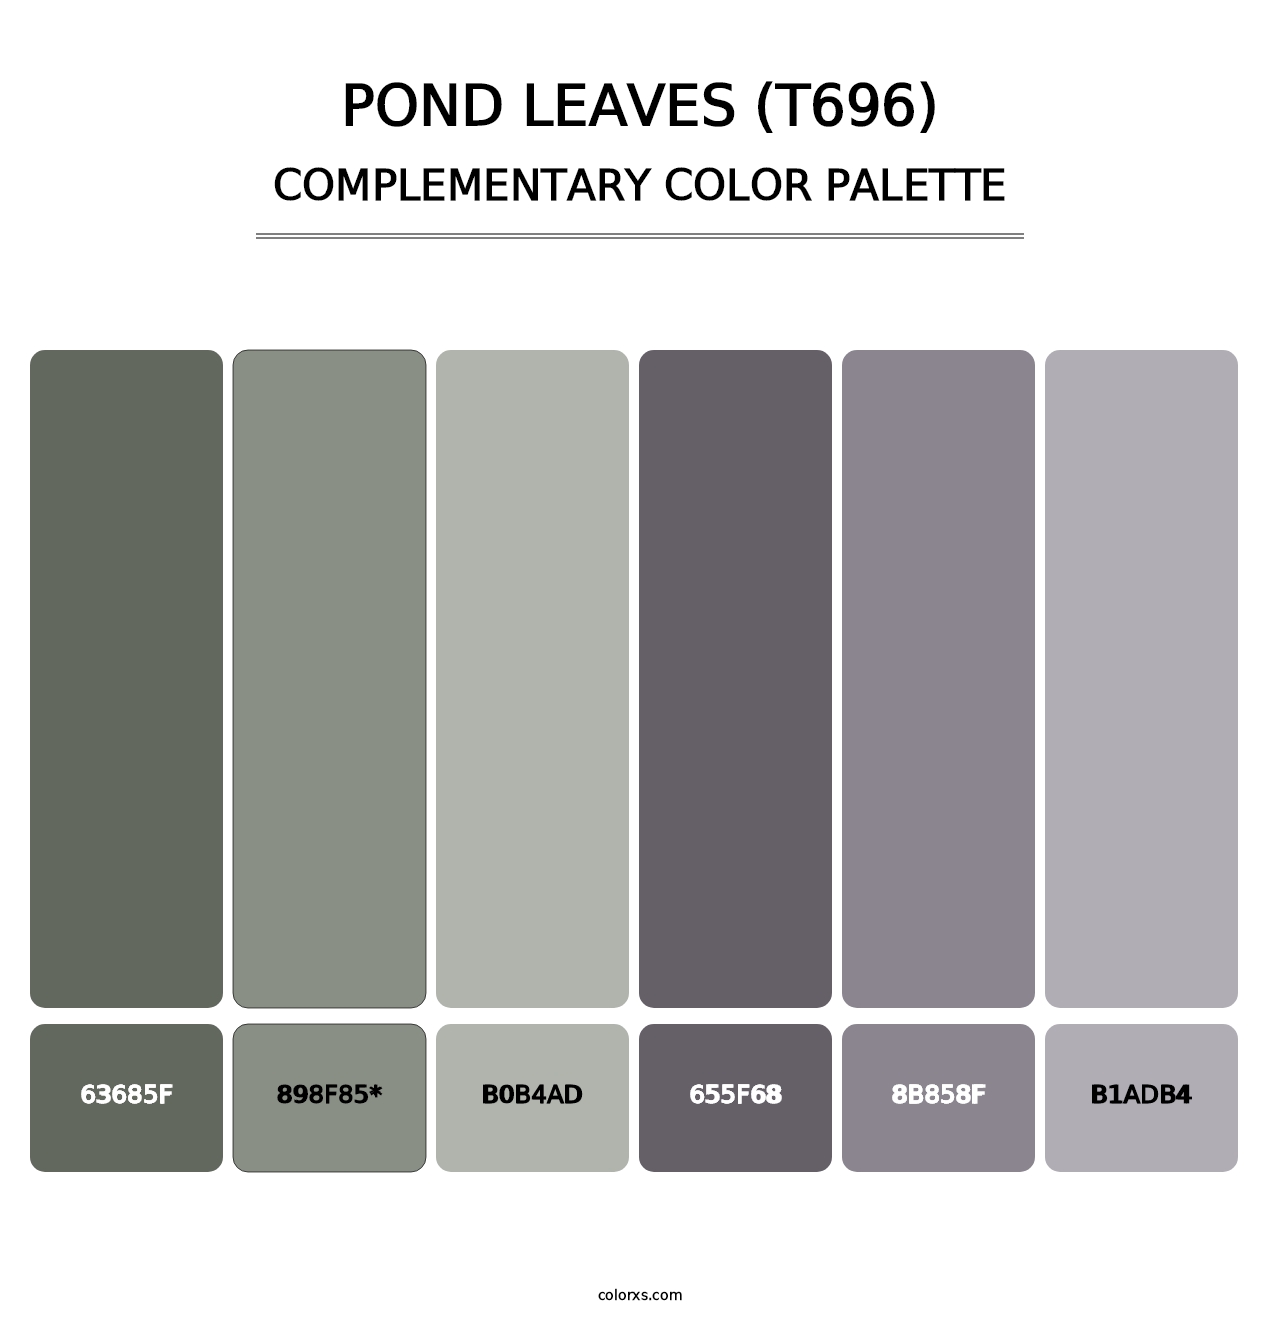 Pond Leaves (T696) - Complementary Color Palette